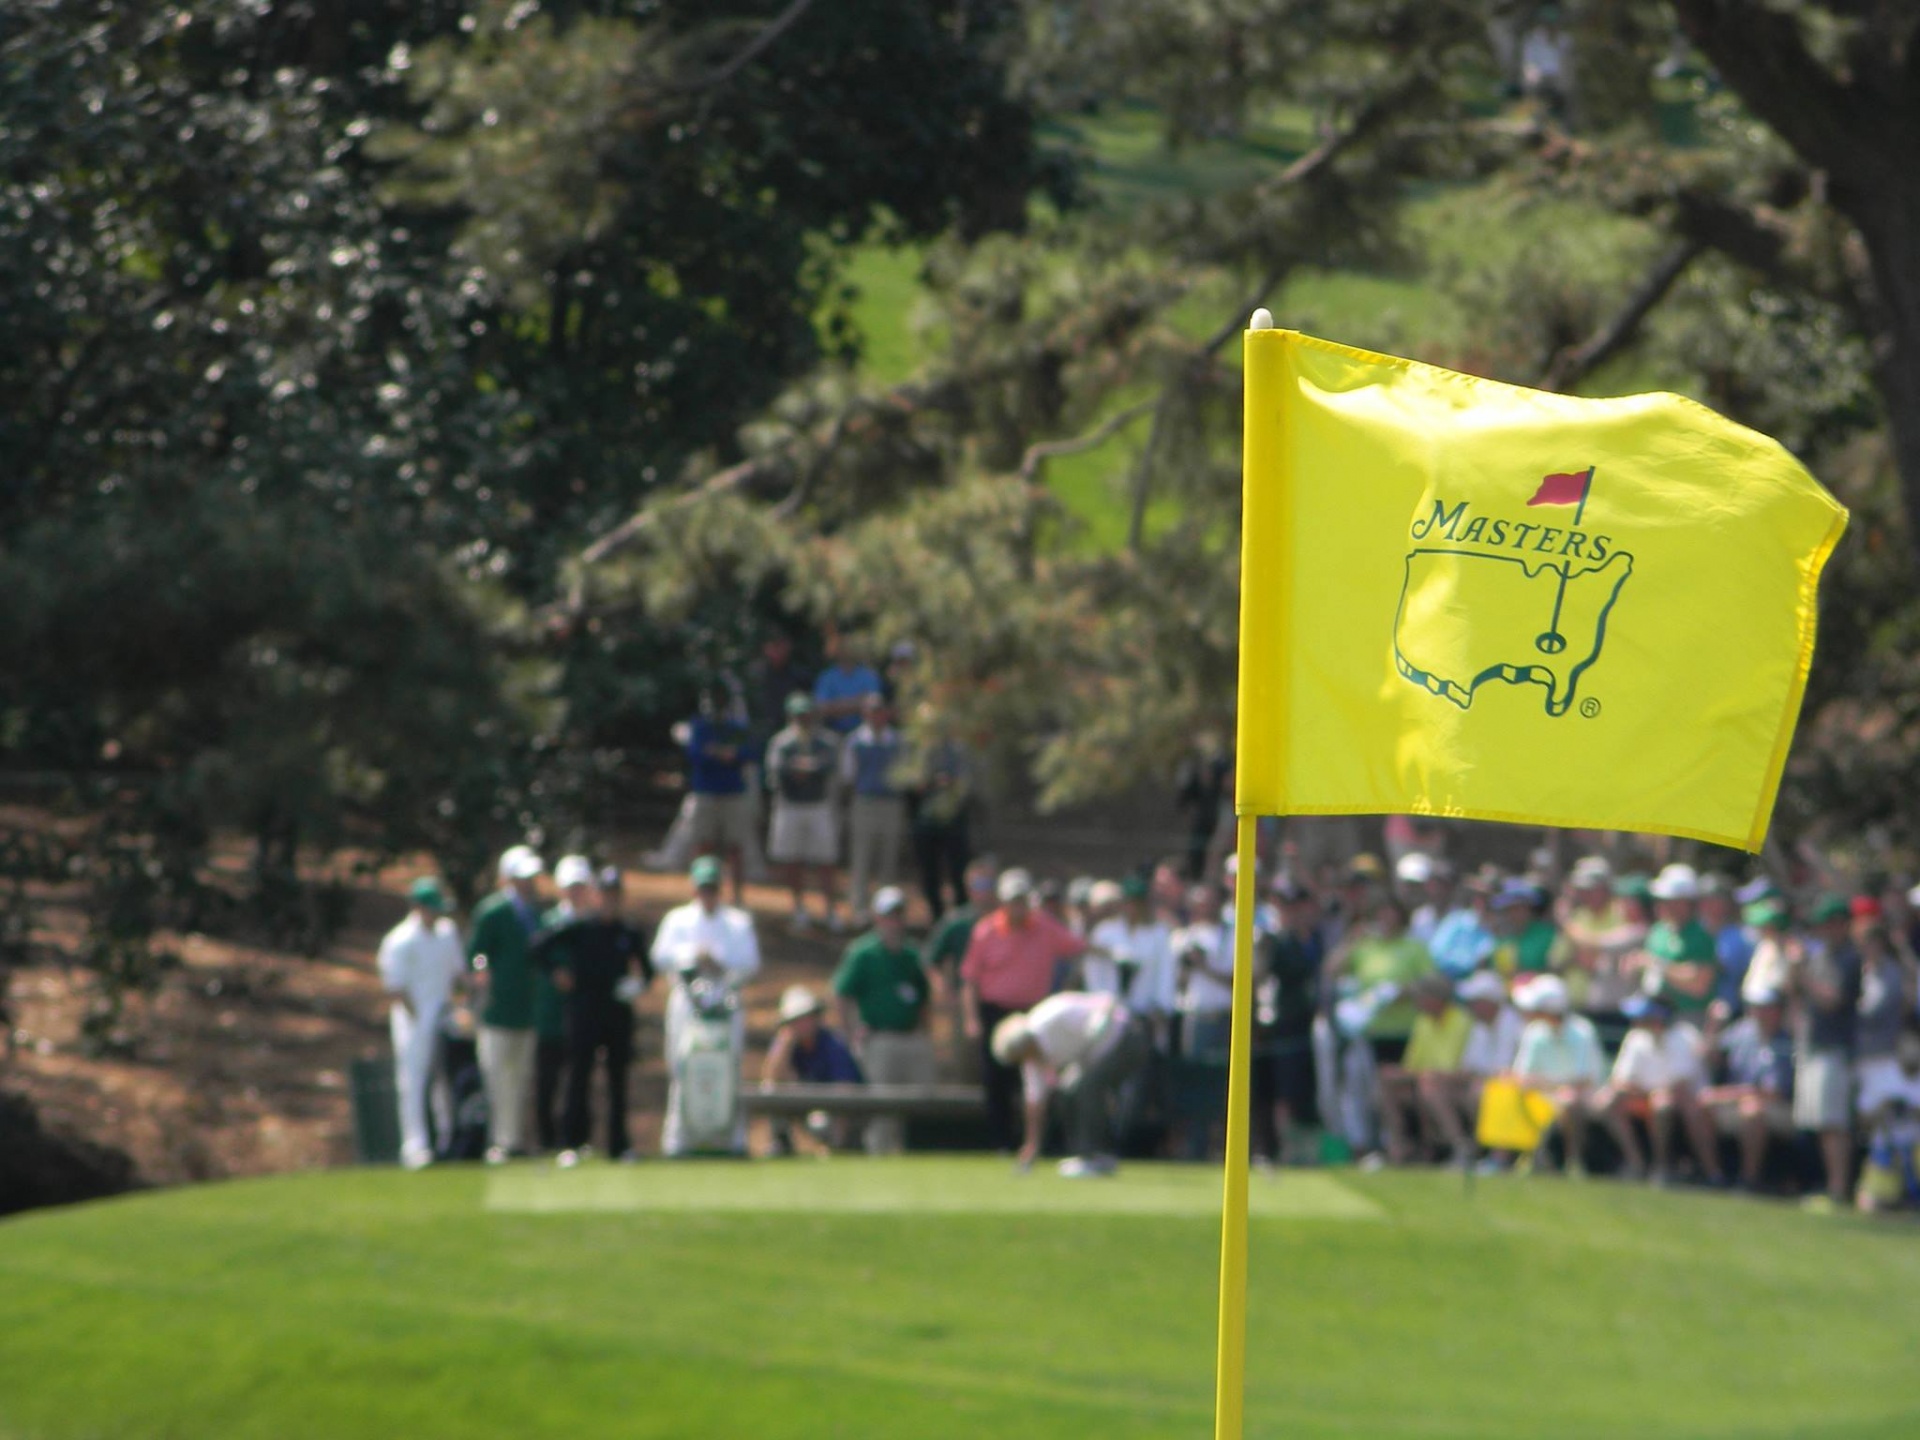 SATIRE: Imagination takes hold while pandemic postpones Masters